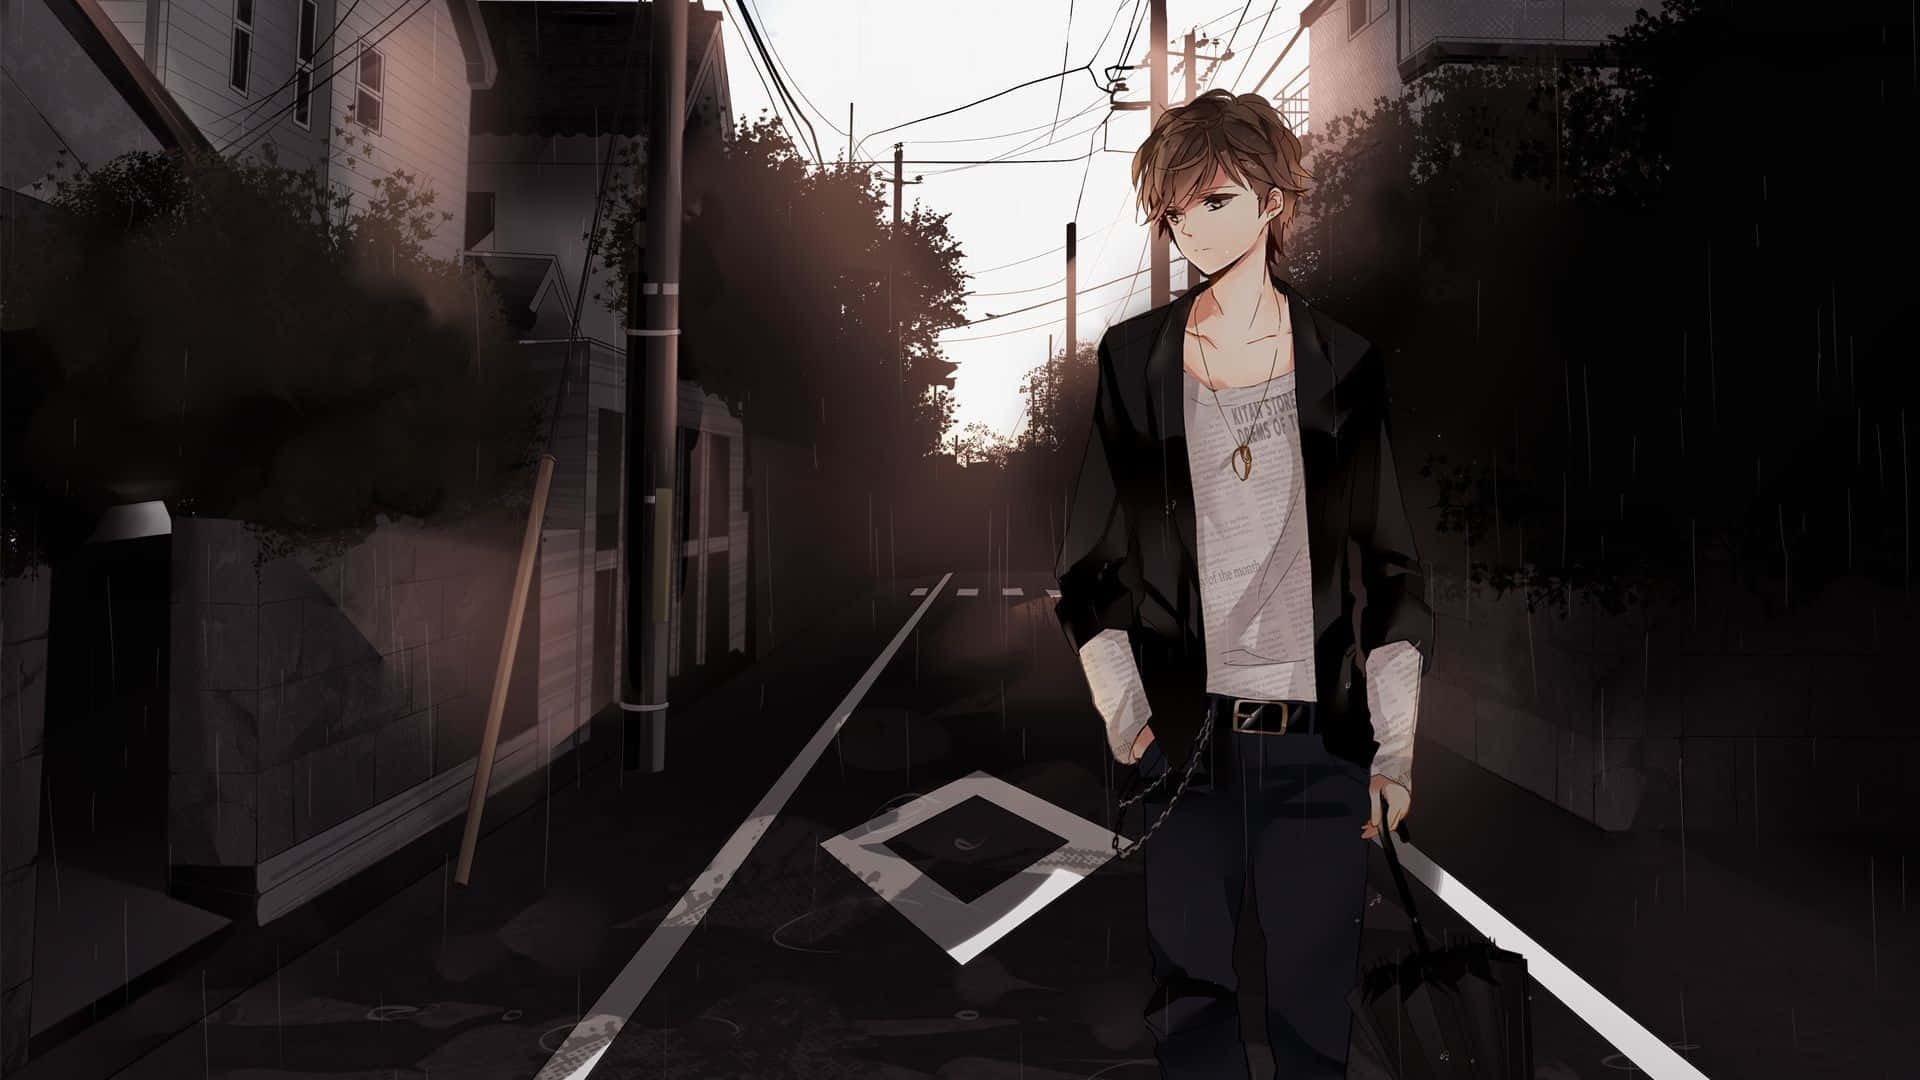 Download A Dark Anime Boy is Lost in a World of Solitude Wallpaper